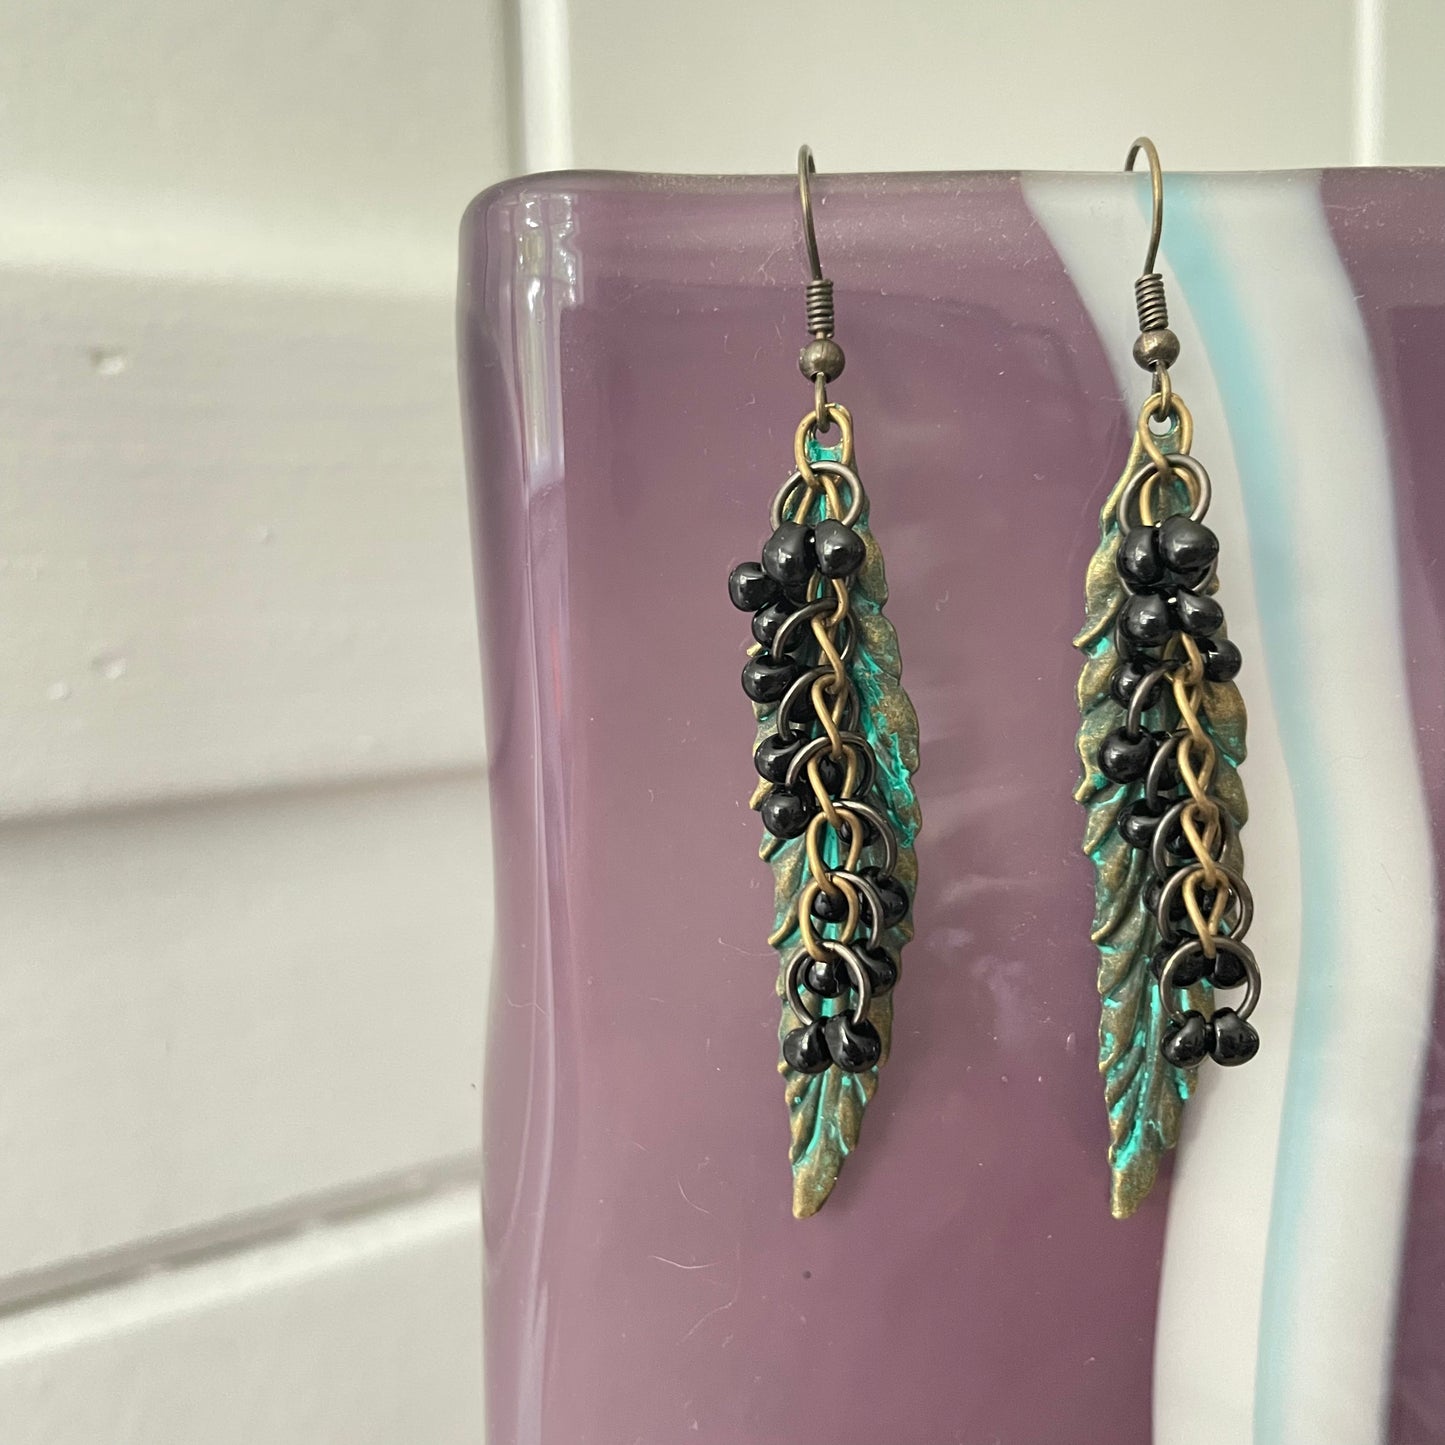 Long Metal Feather & Mini Black Glass Dangling Accent Bead Chain Earrings 2.75" Antiqued Patina Brass Southwestern